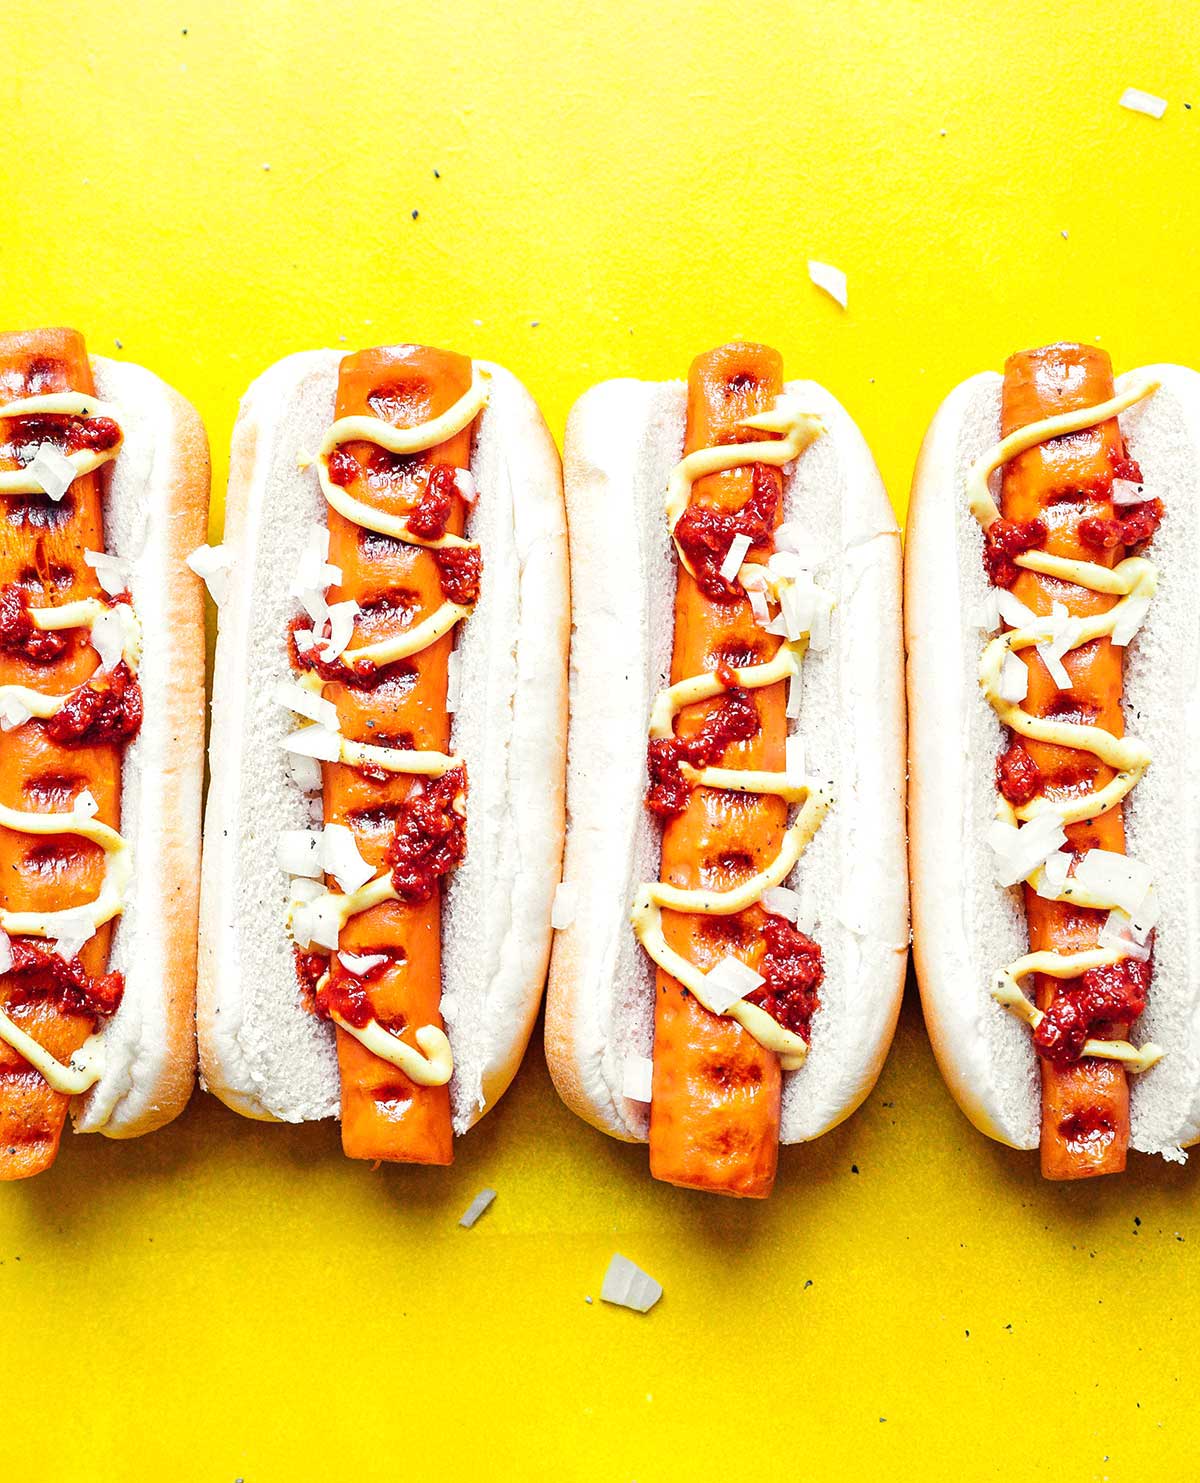 Four carrot hot dogs in buns topped with chopped white onion, ketchup, and mustard